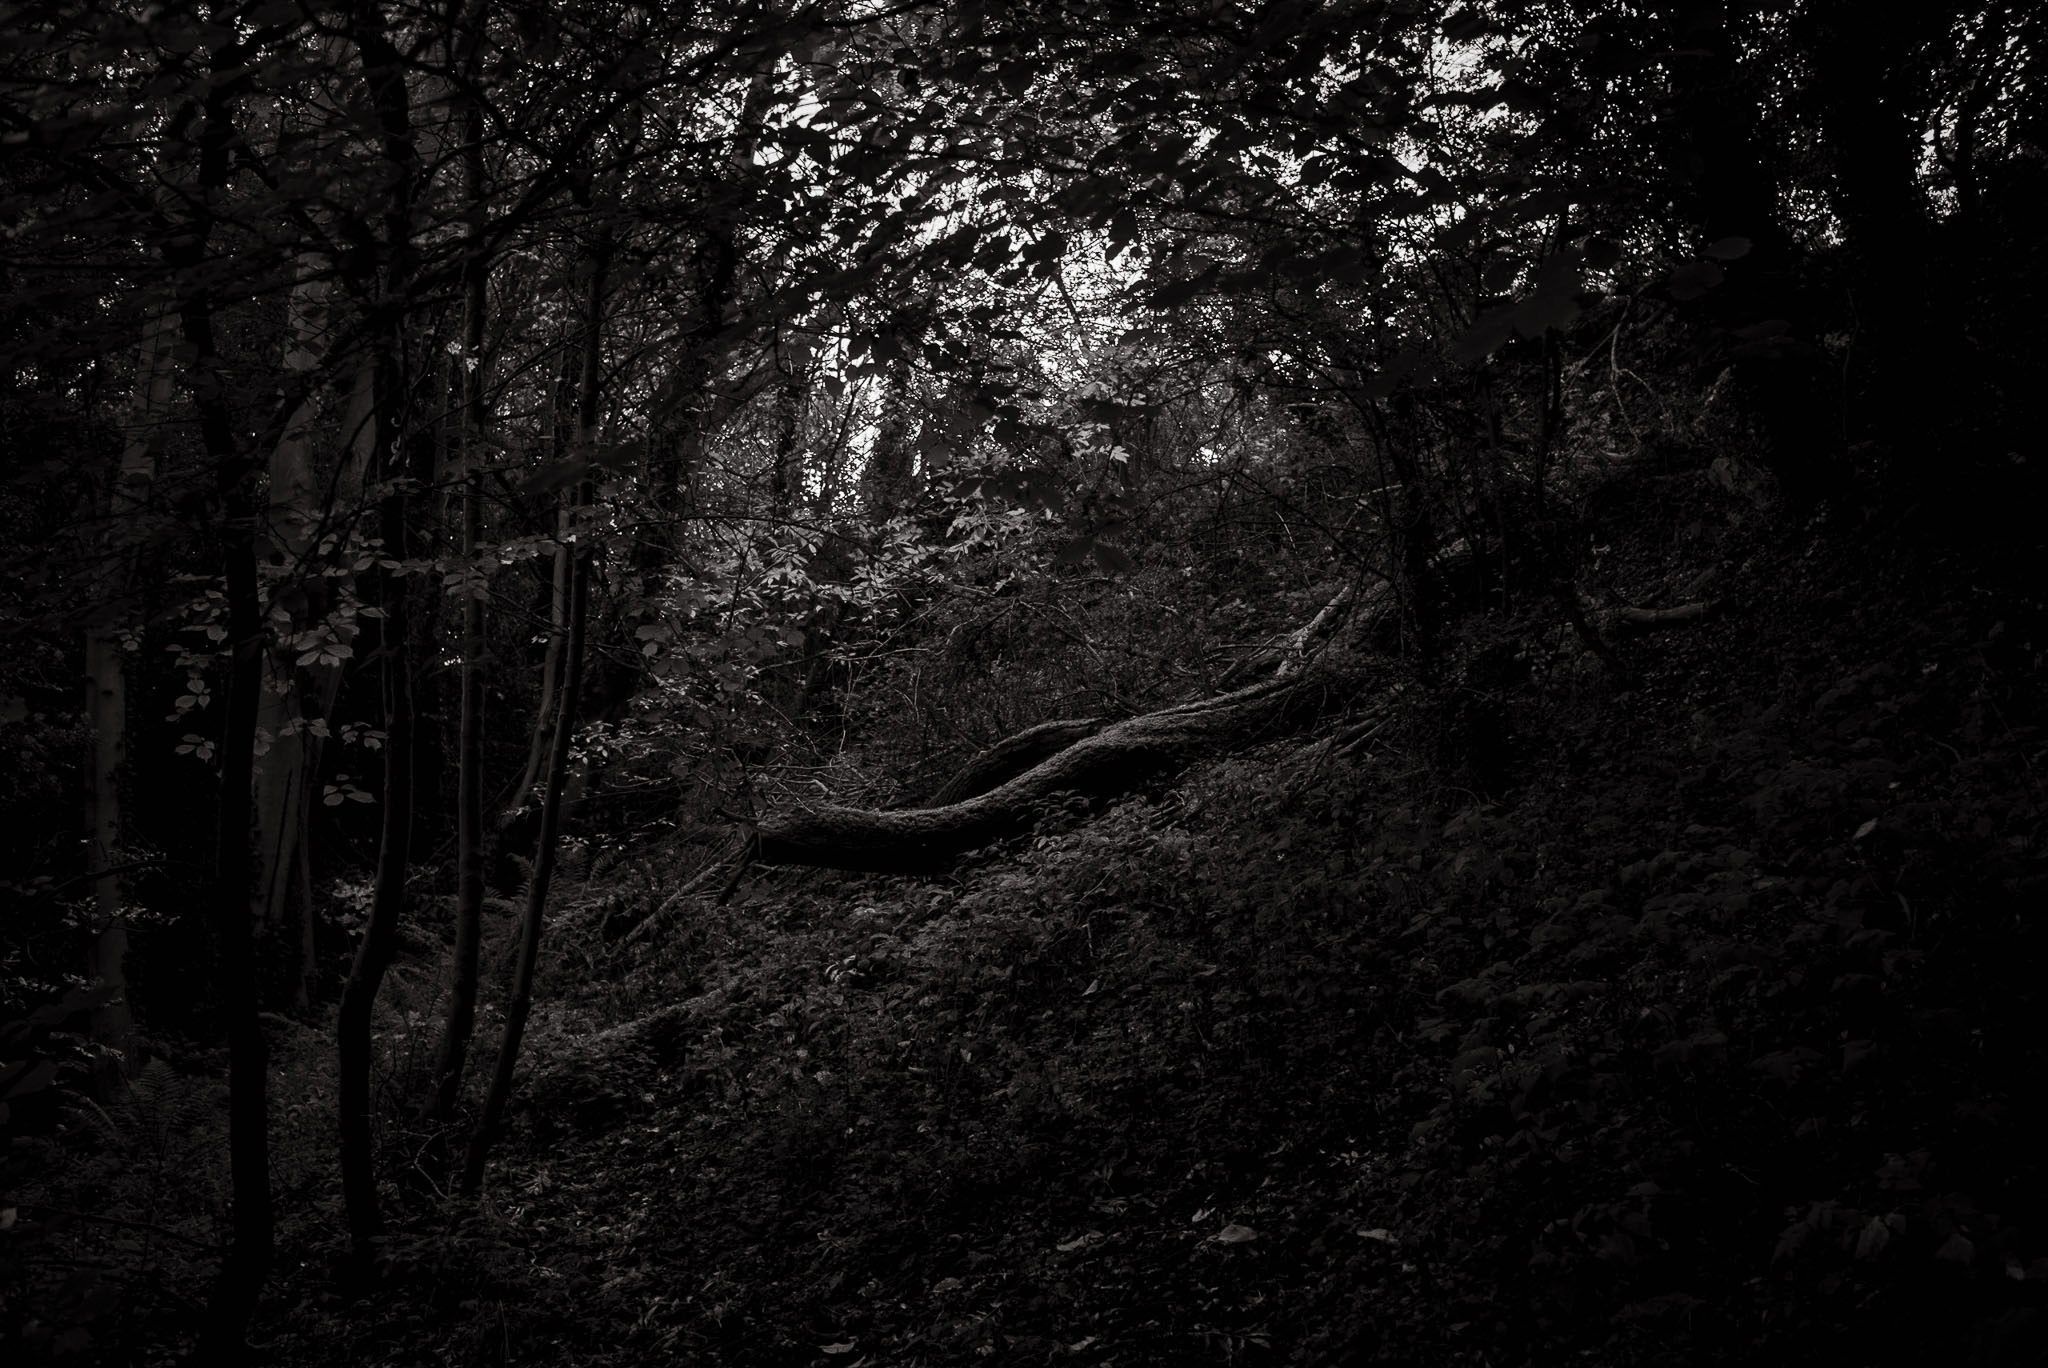 Another tree has fallen in a dark moody forest.